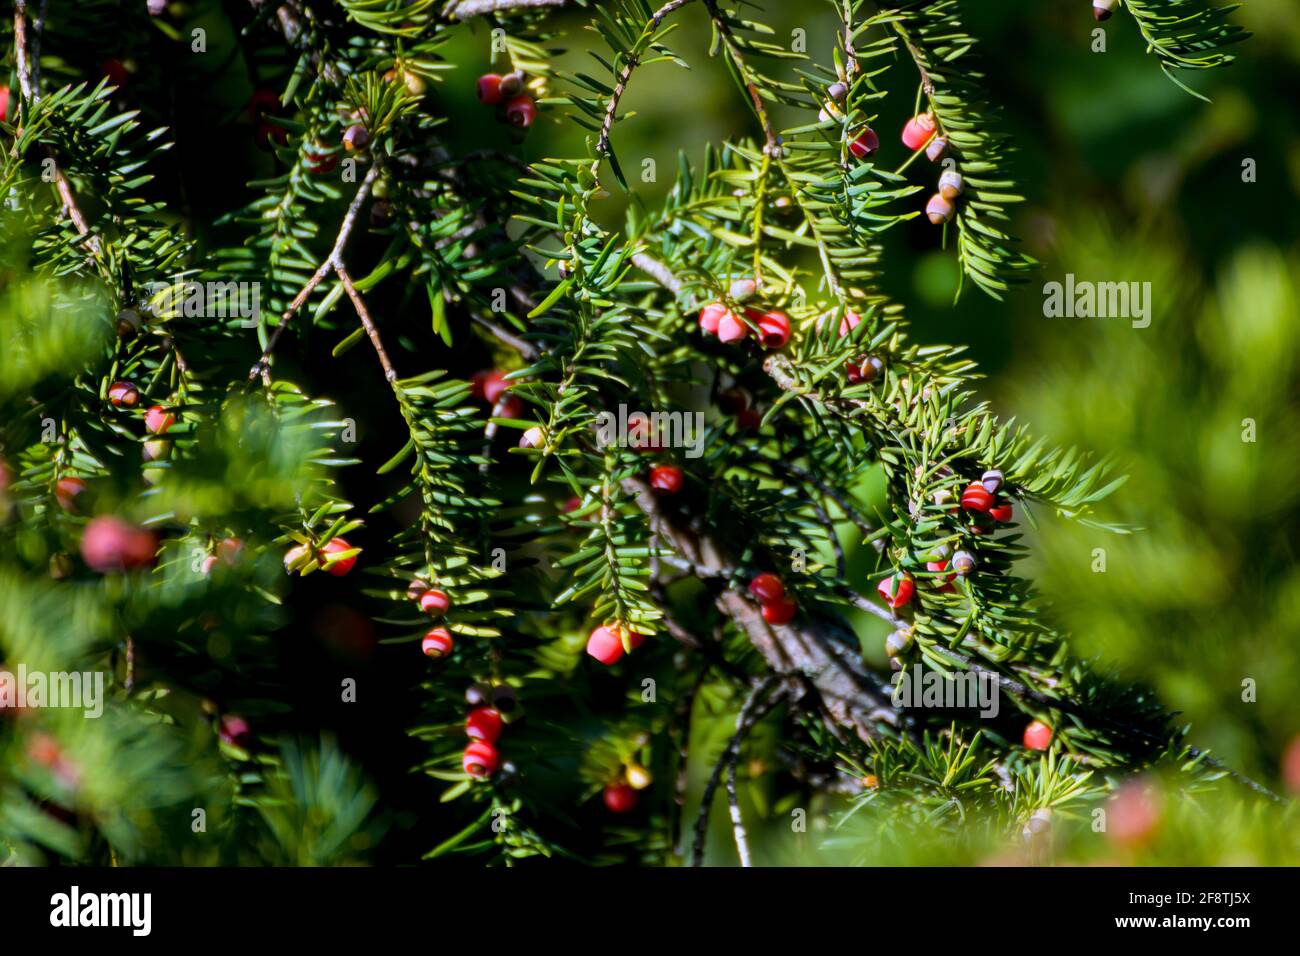 Taxus cuspidata, the Japanese yew or spreading yew, a coniferous tree. Beautiful red berries in the sun, called  arils with a red fleshy cup. Stock Photo